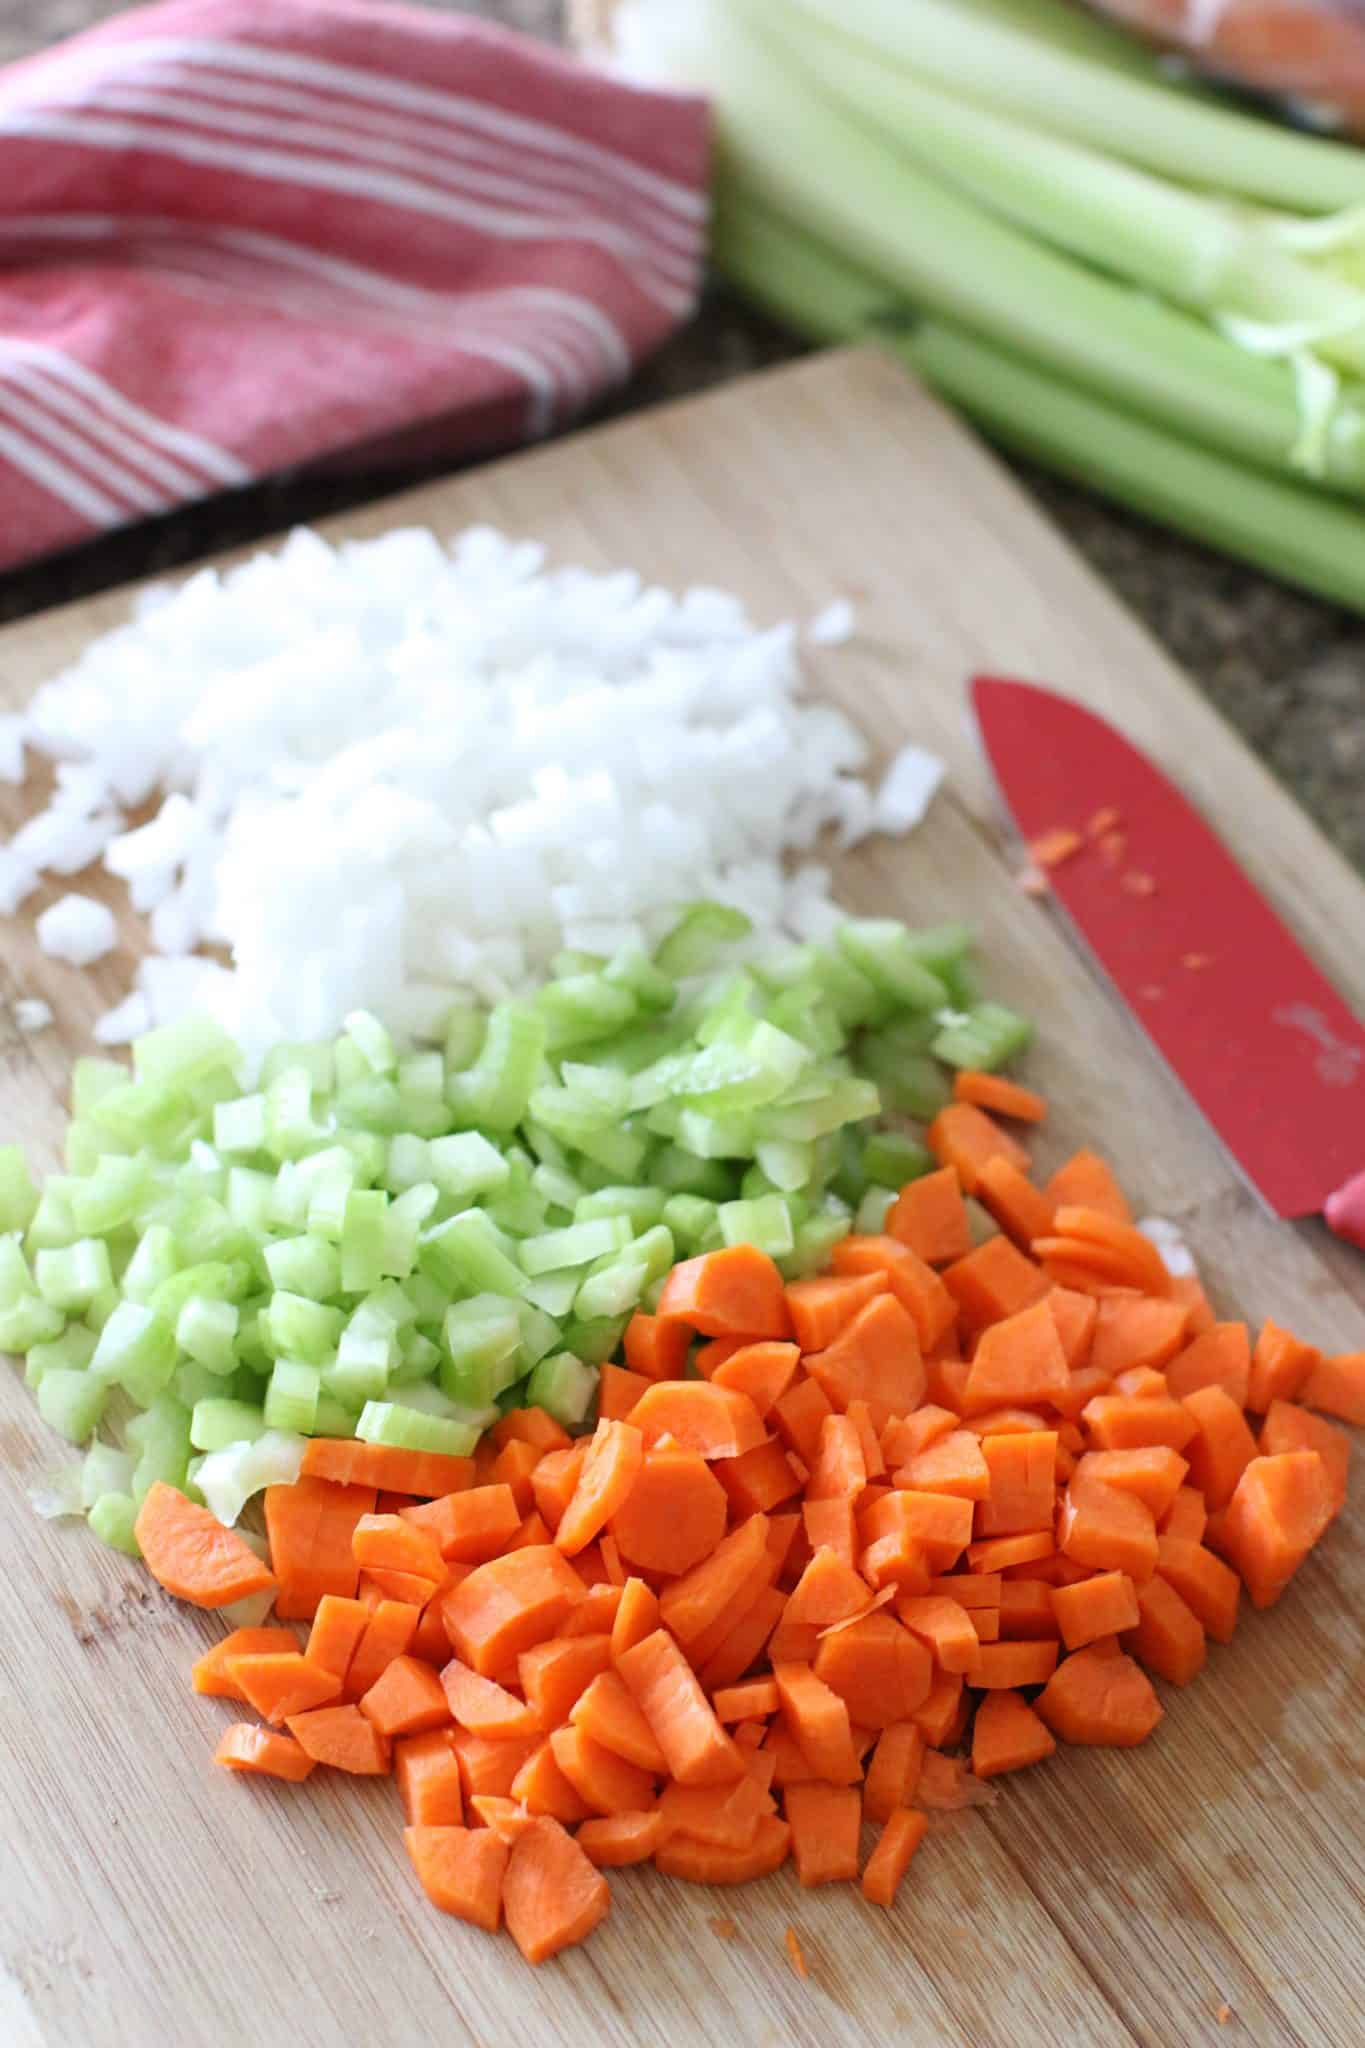 diced onion, celery, carrots on a wooden cutting board with a red knife.